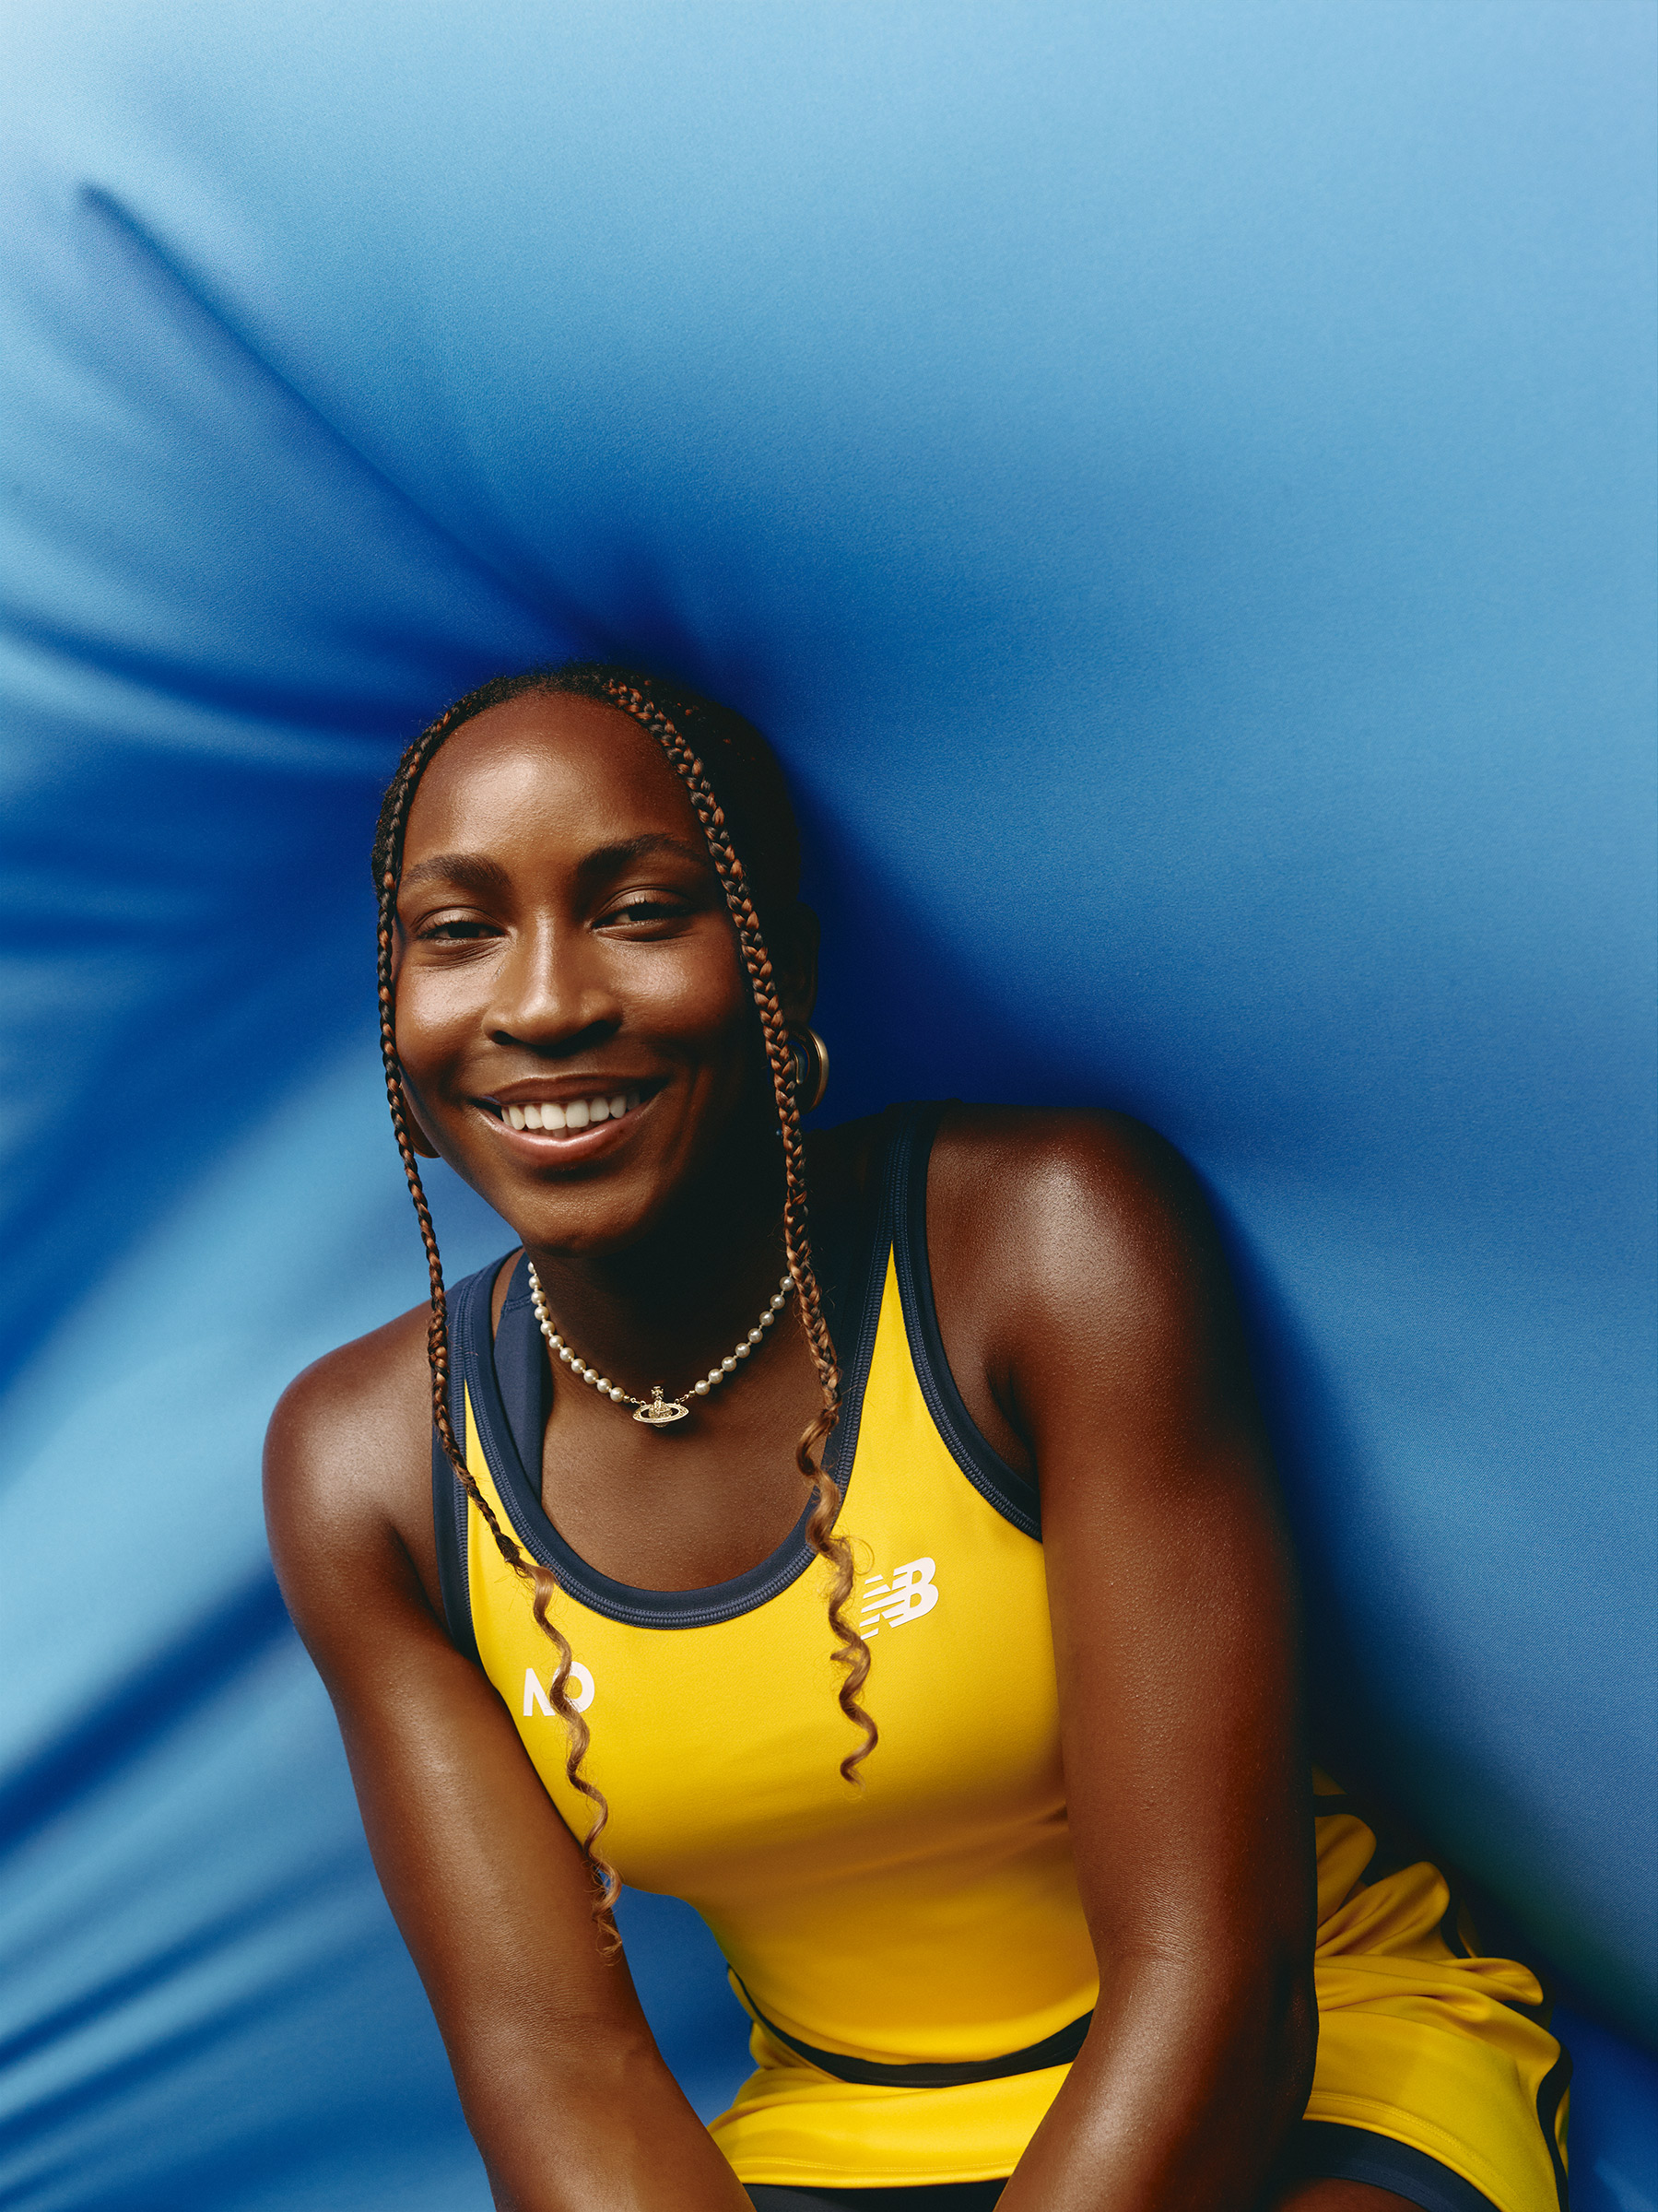 Gauff, ranked No. 3 in the world, photographed in Melbourne on Jan. 9